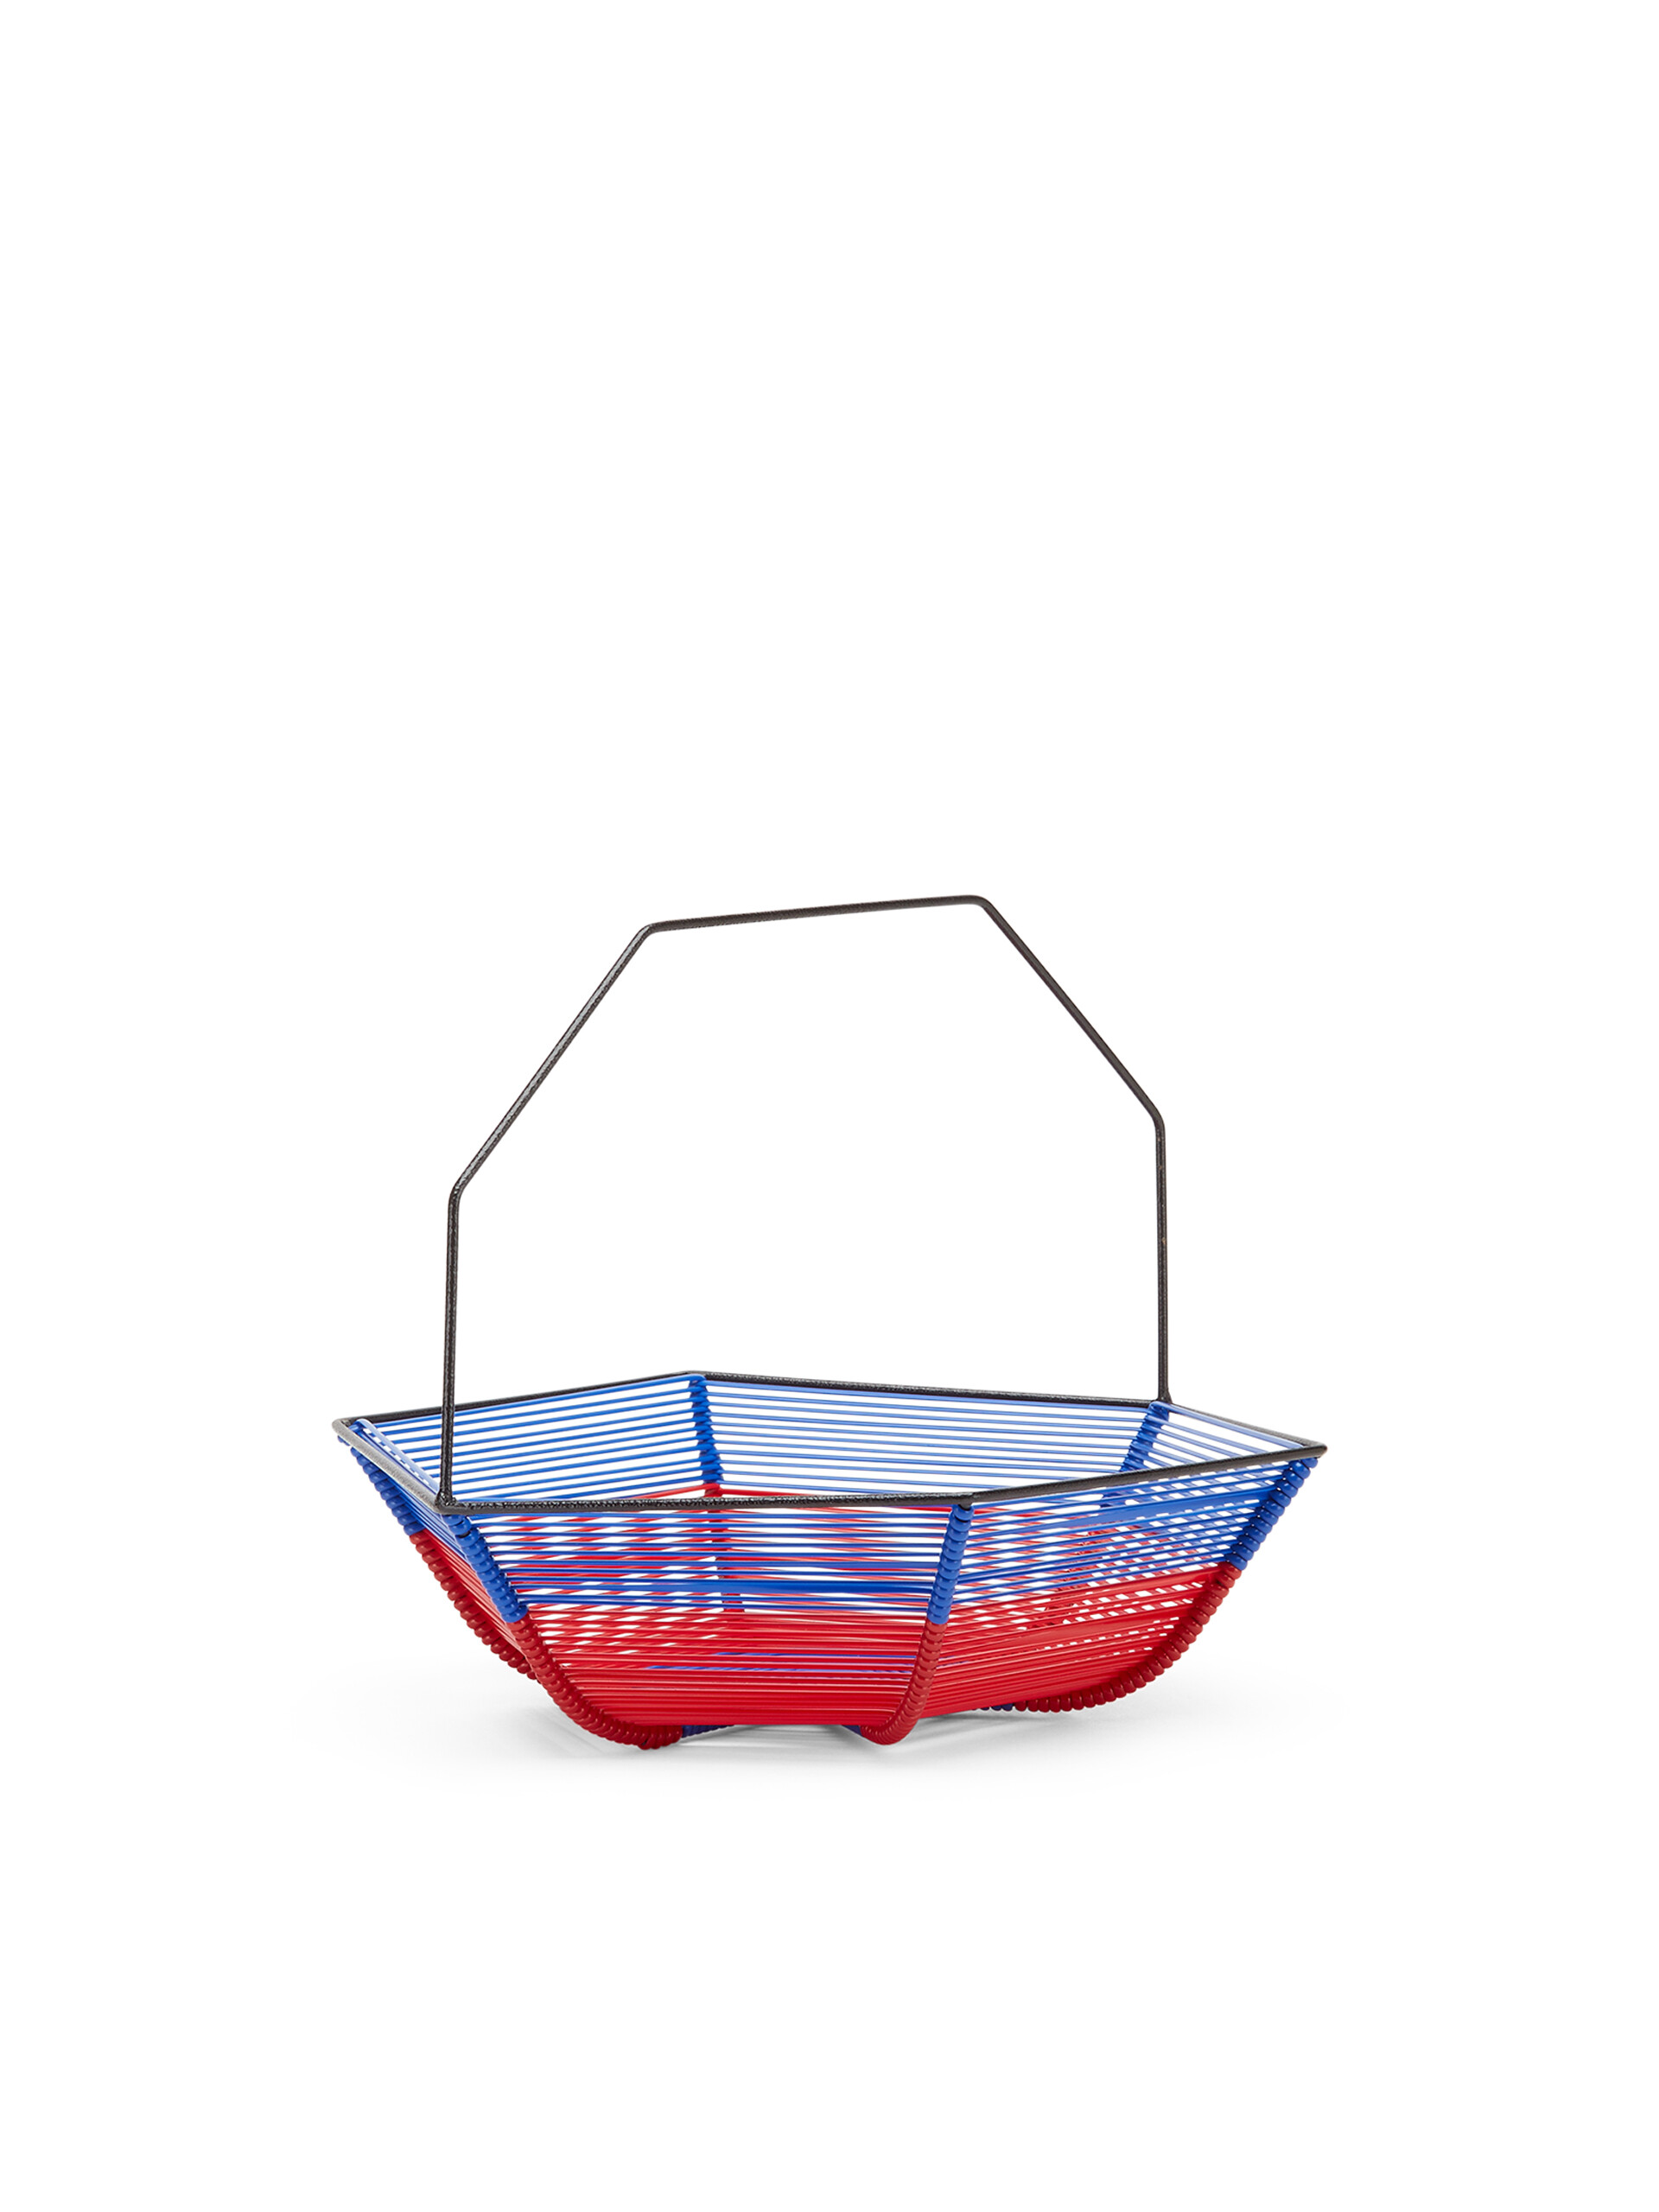 MARNI MARKET hexagonal blue and red fruit holder - Accessories - Image 2